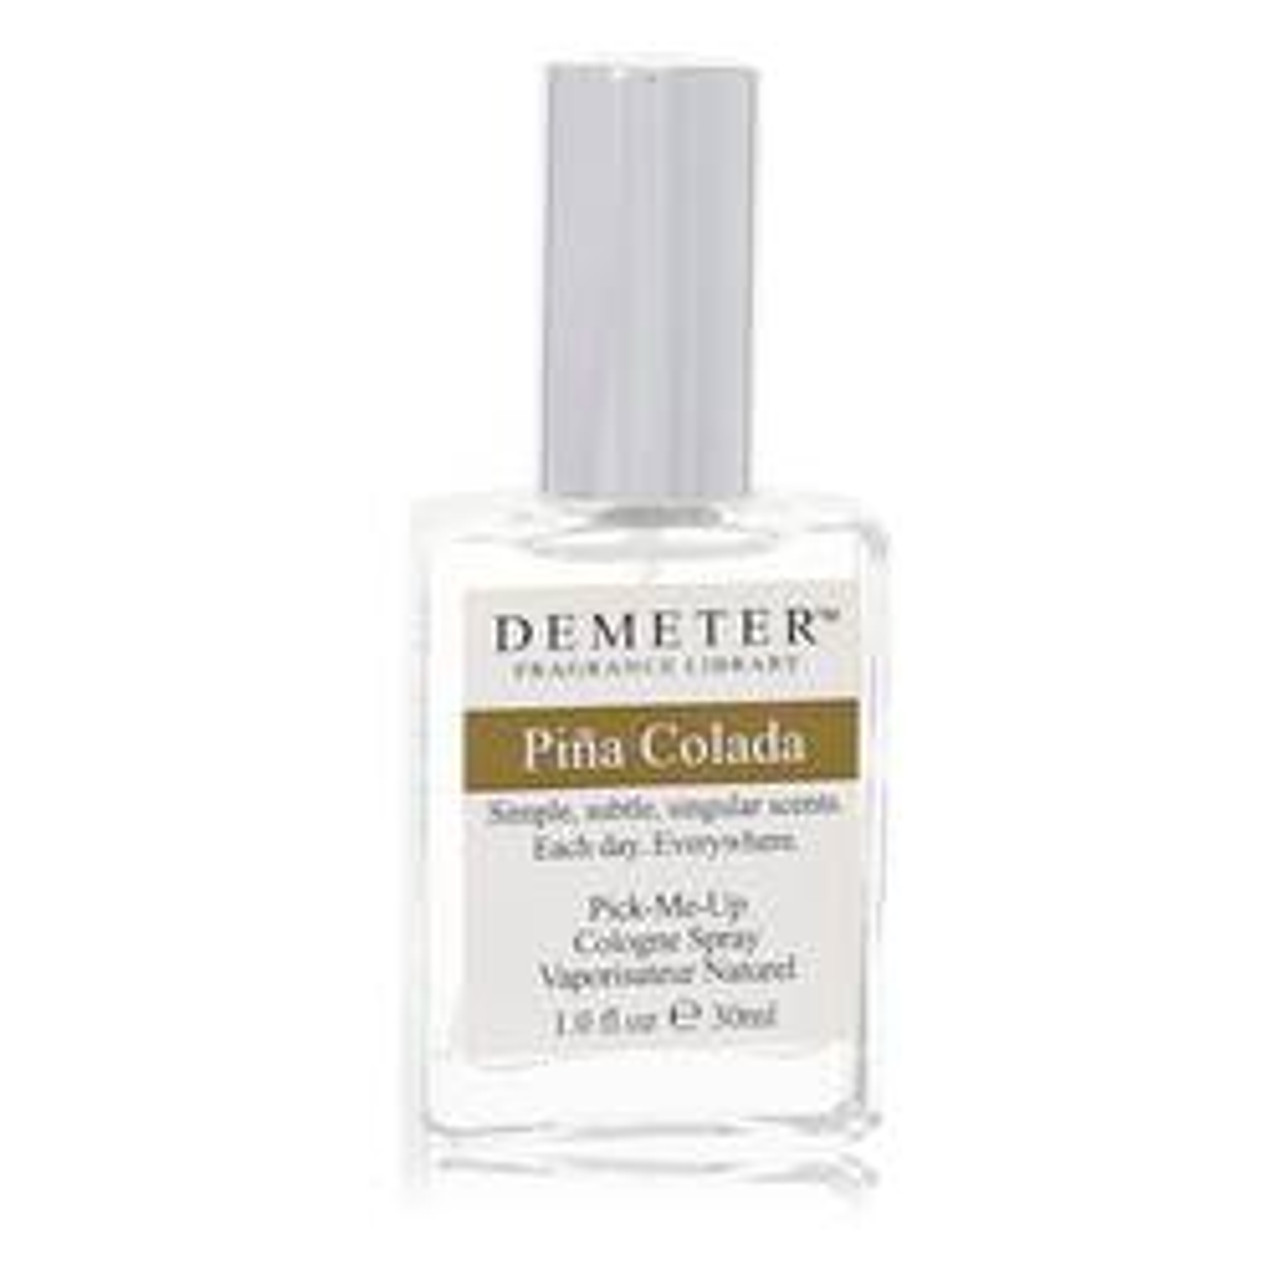 Demeter Pina Colada Perfume By Demeter Cologne Spray 1 oz for Women - [From 35.00 - Choose pk Qty ] - *Ships from Miami